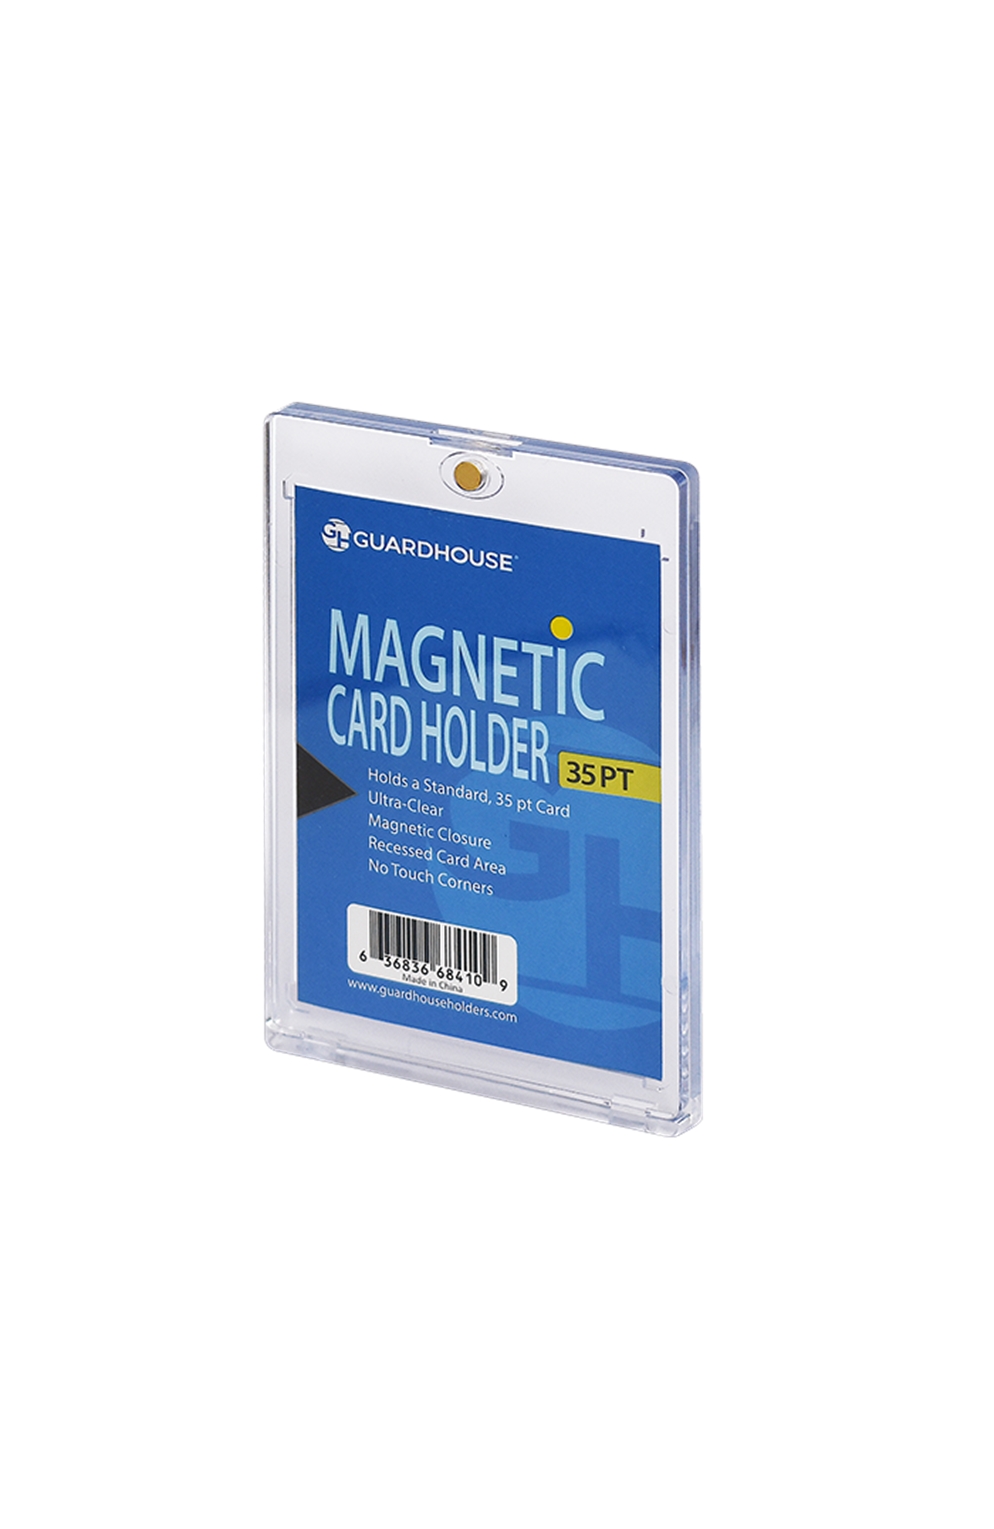 Guardhouse Magnetic Card Holders - 35 Pt